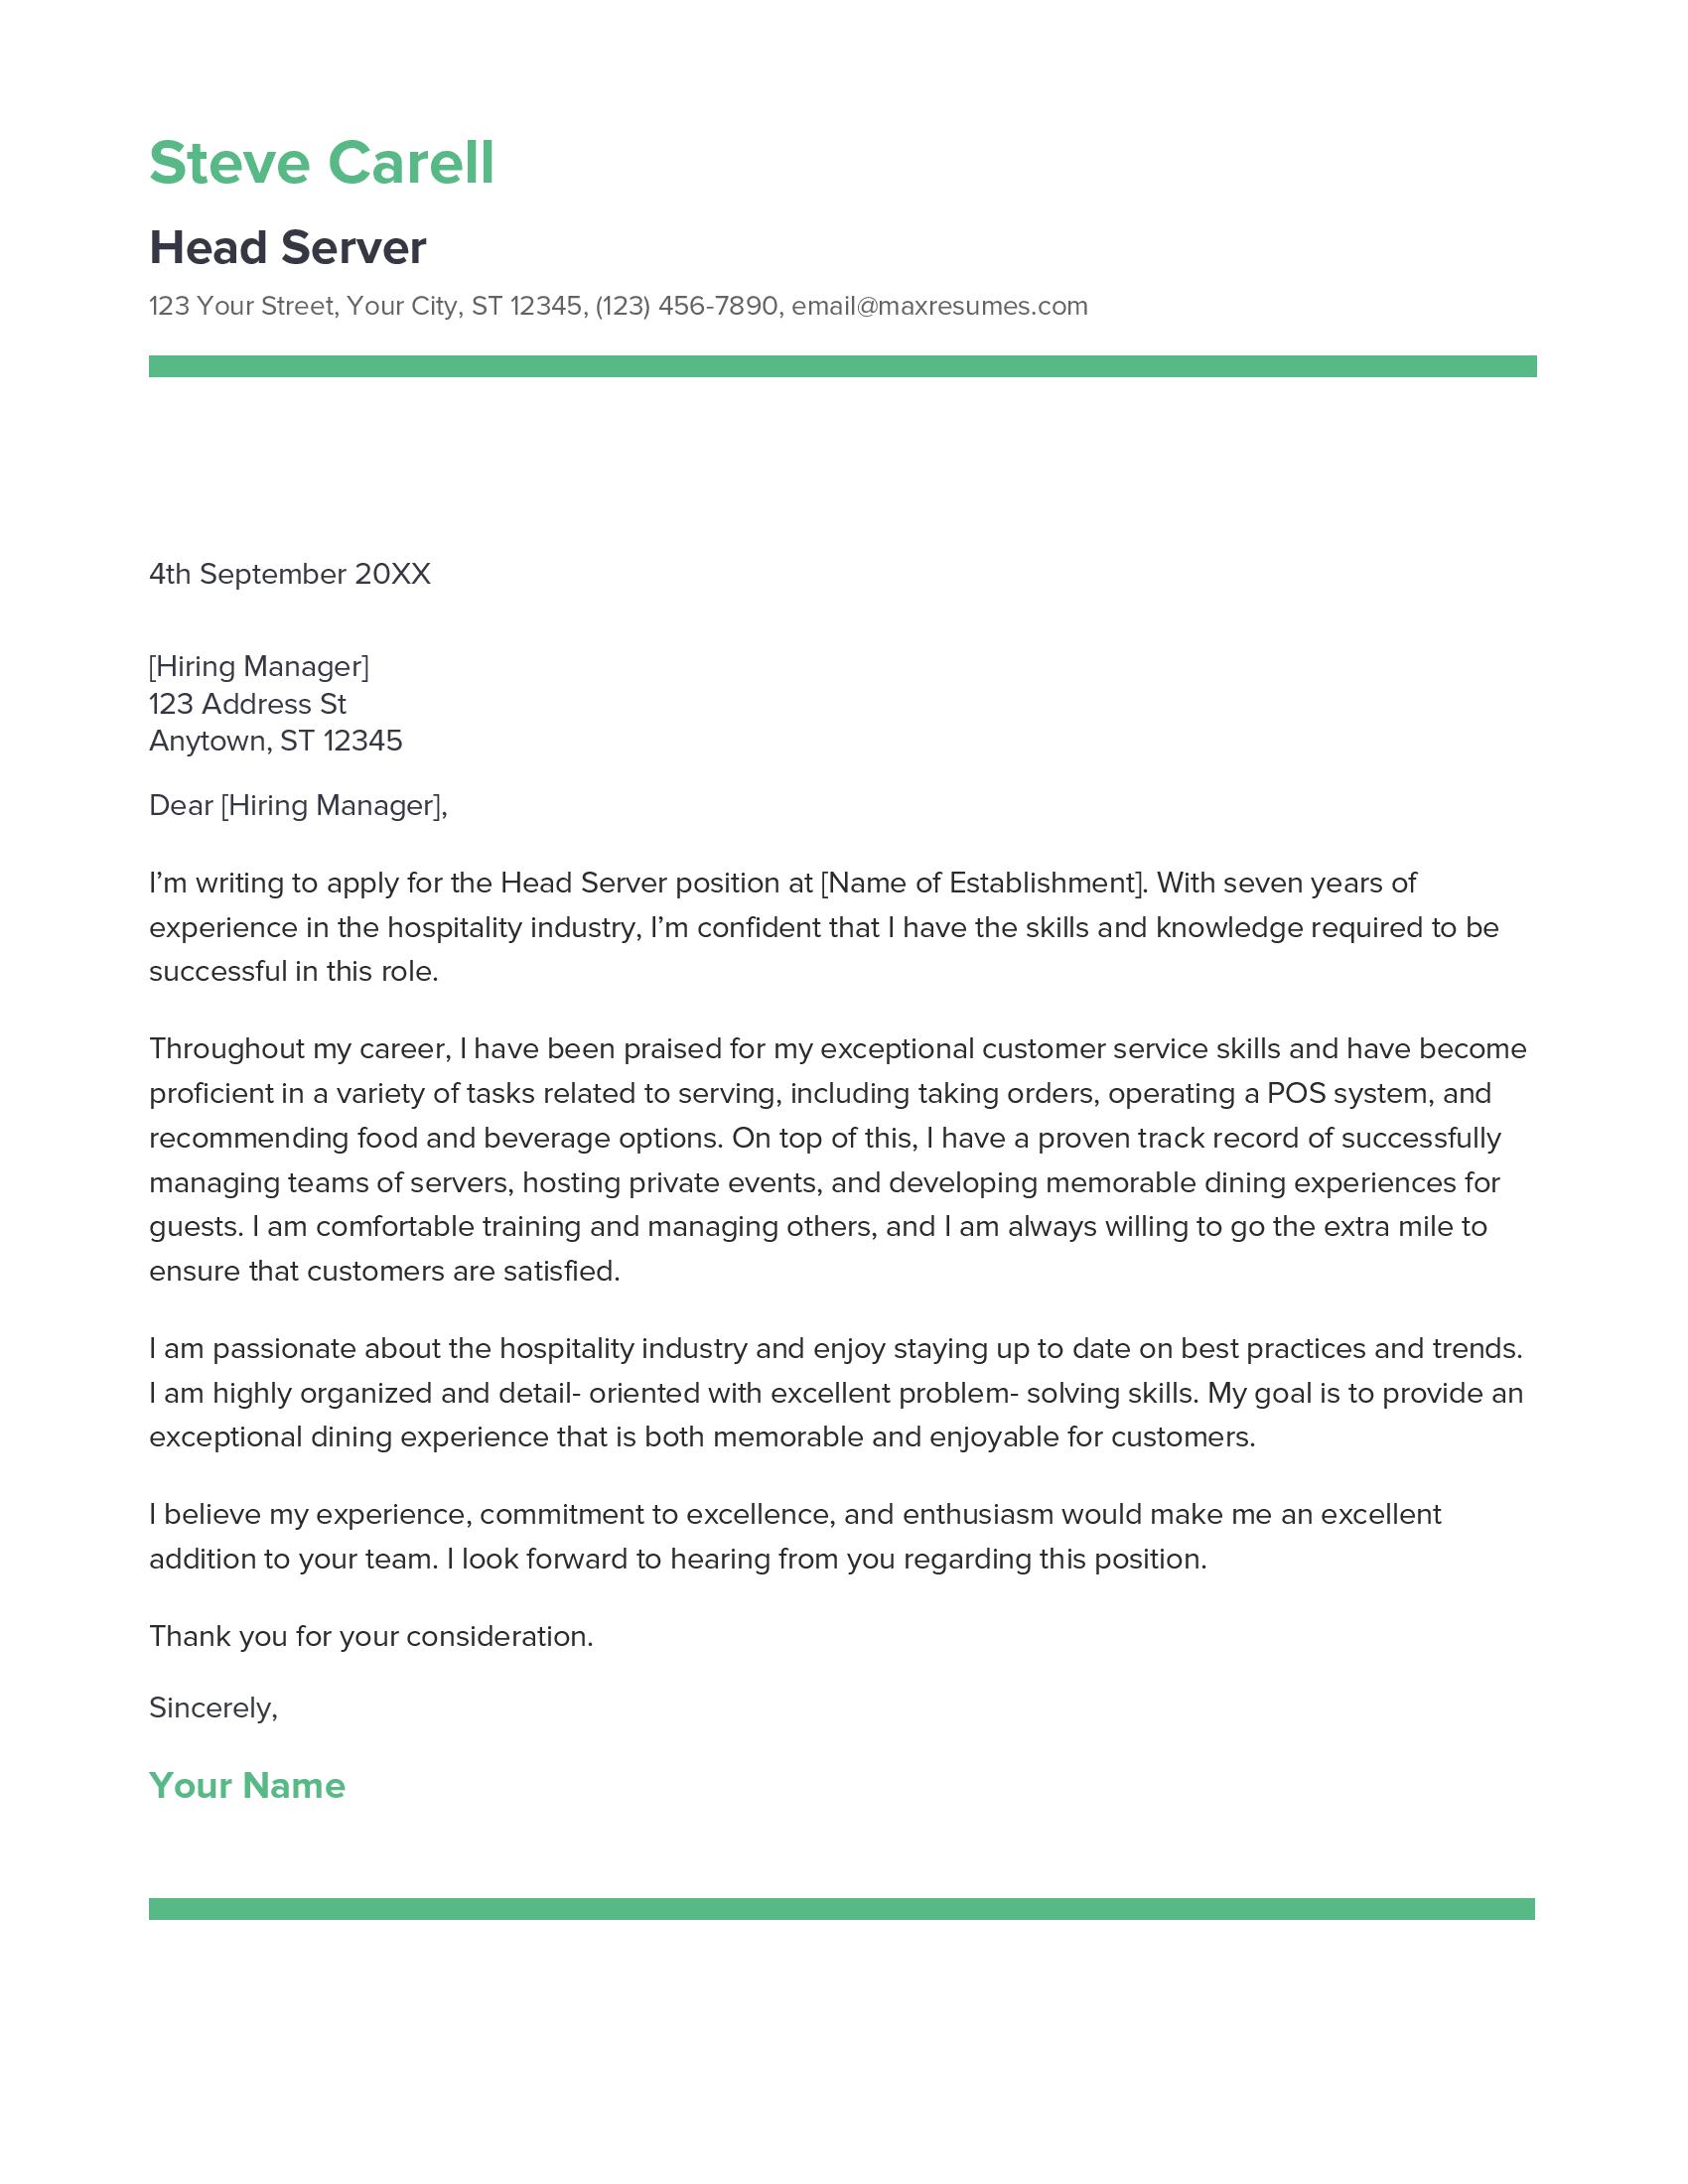 Head Server Cover Letter Example